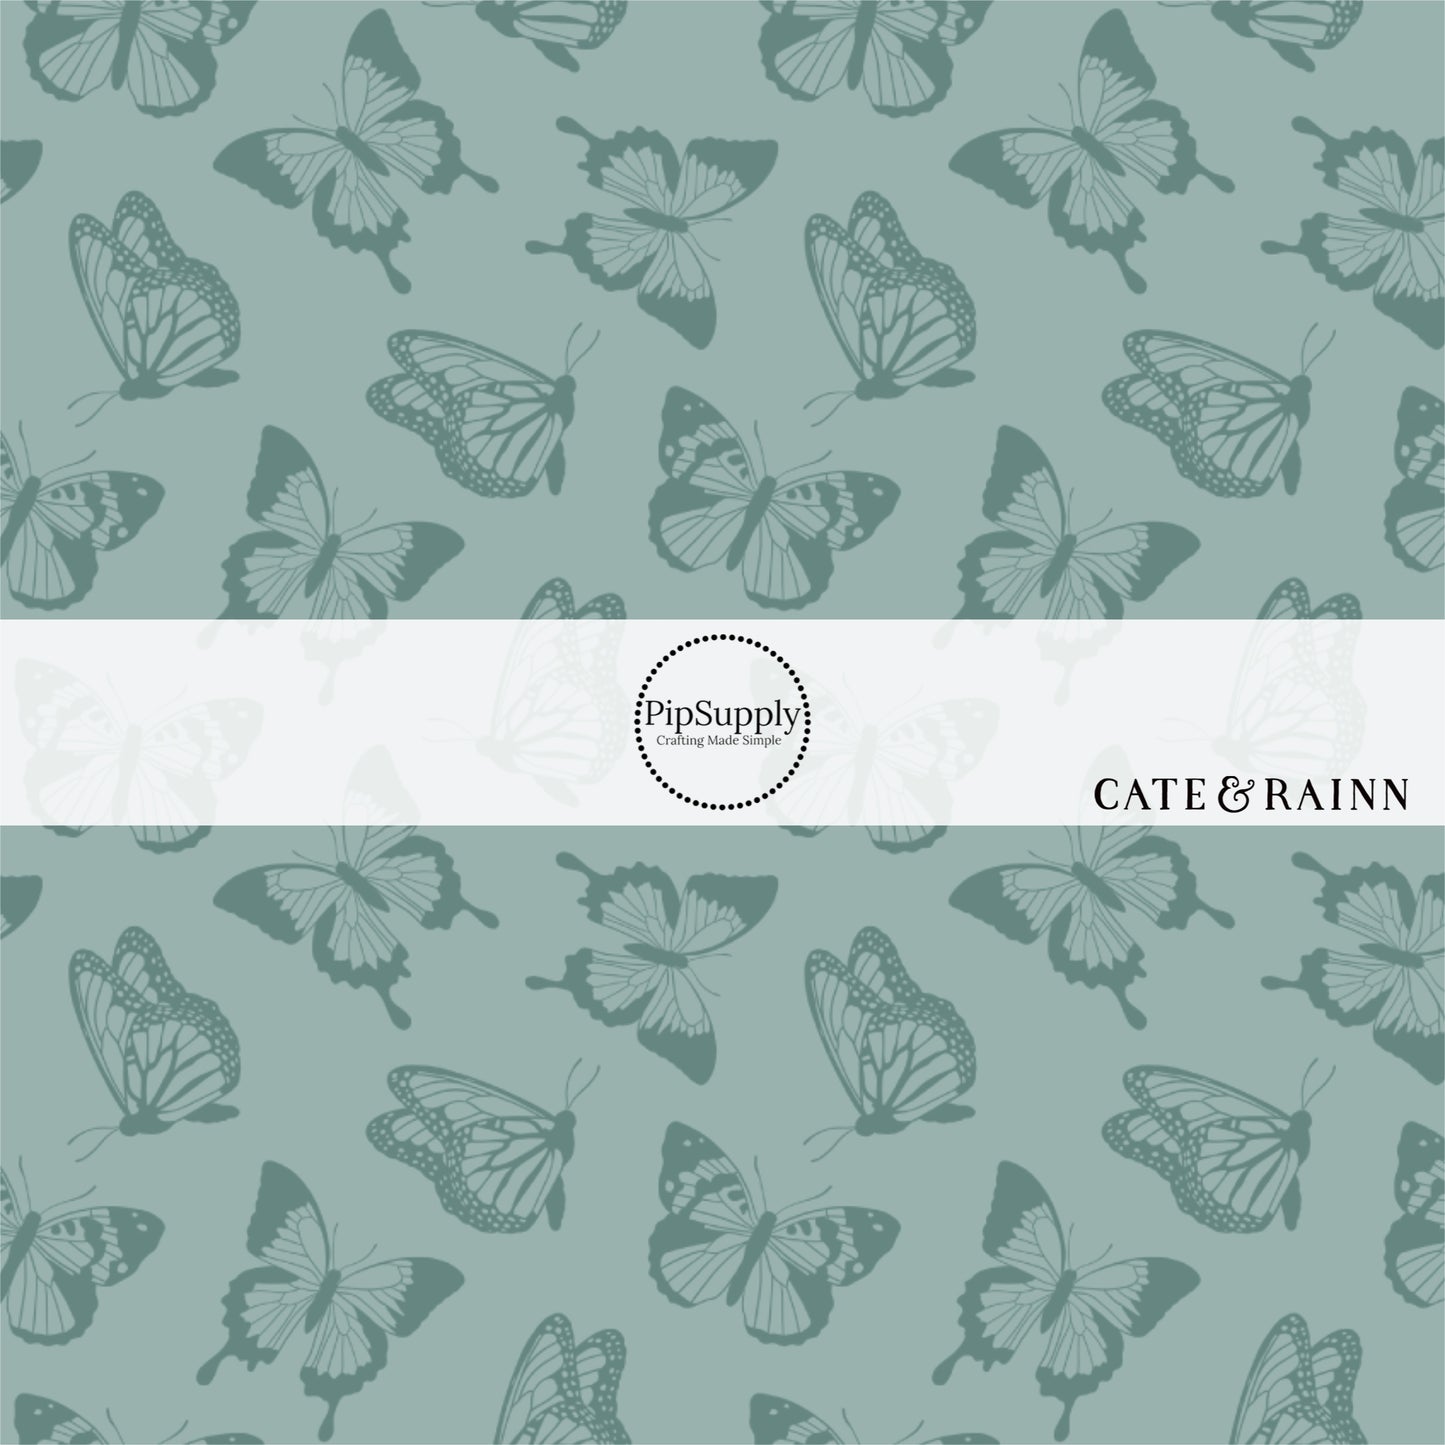 Light Teal Fabric by the yard with butterfly silhouettes